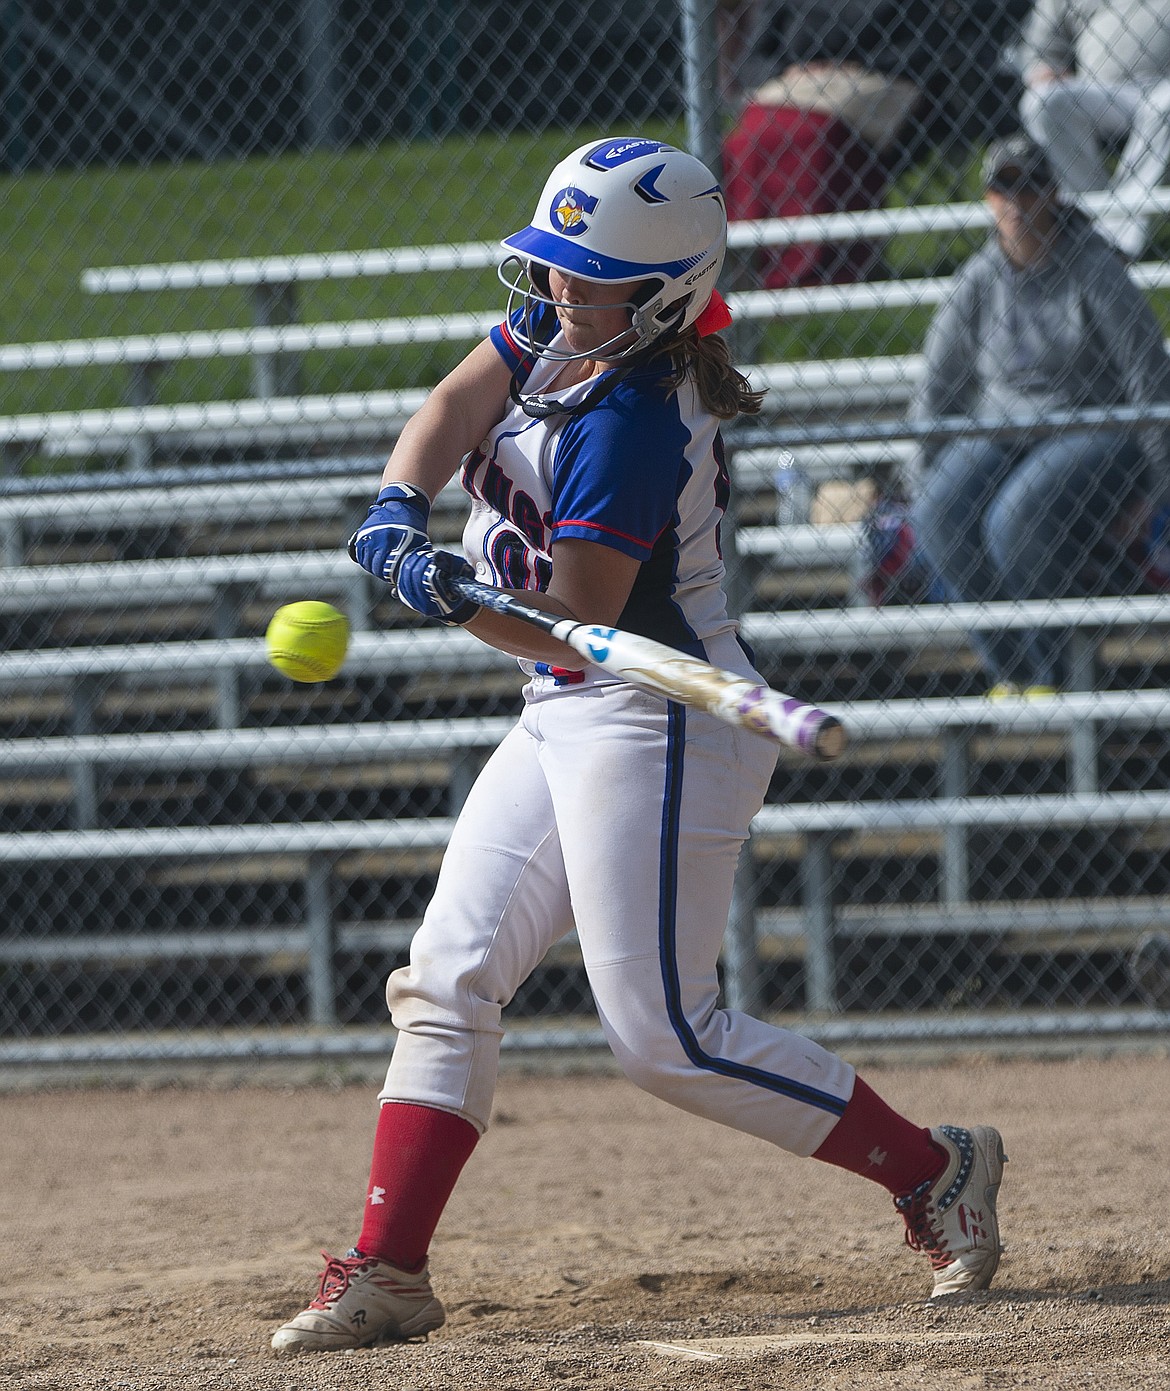 Coeur d&#146;Alene&#146;s Marilyn Comack makes contact on a pitch against Lake City.